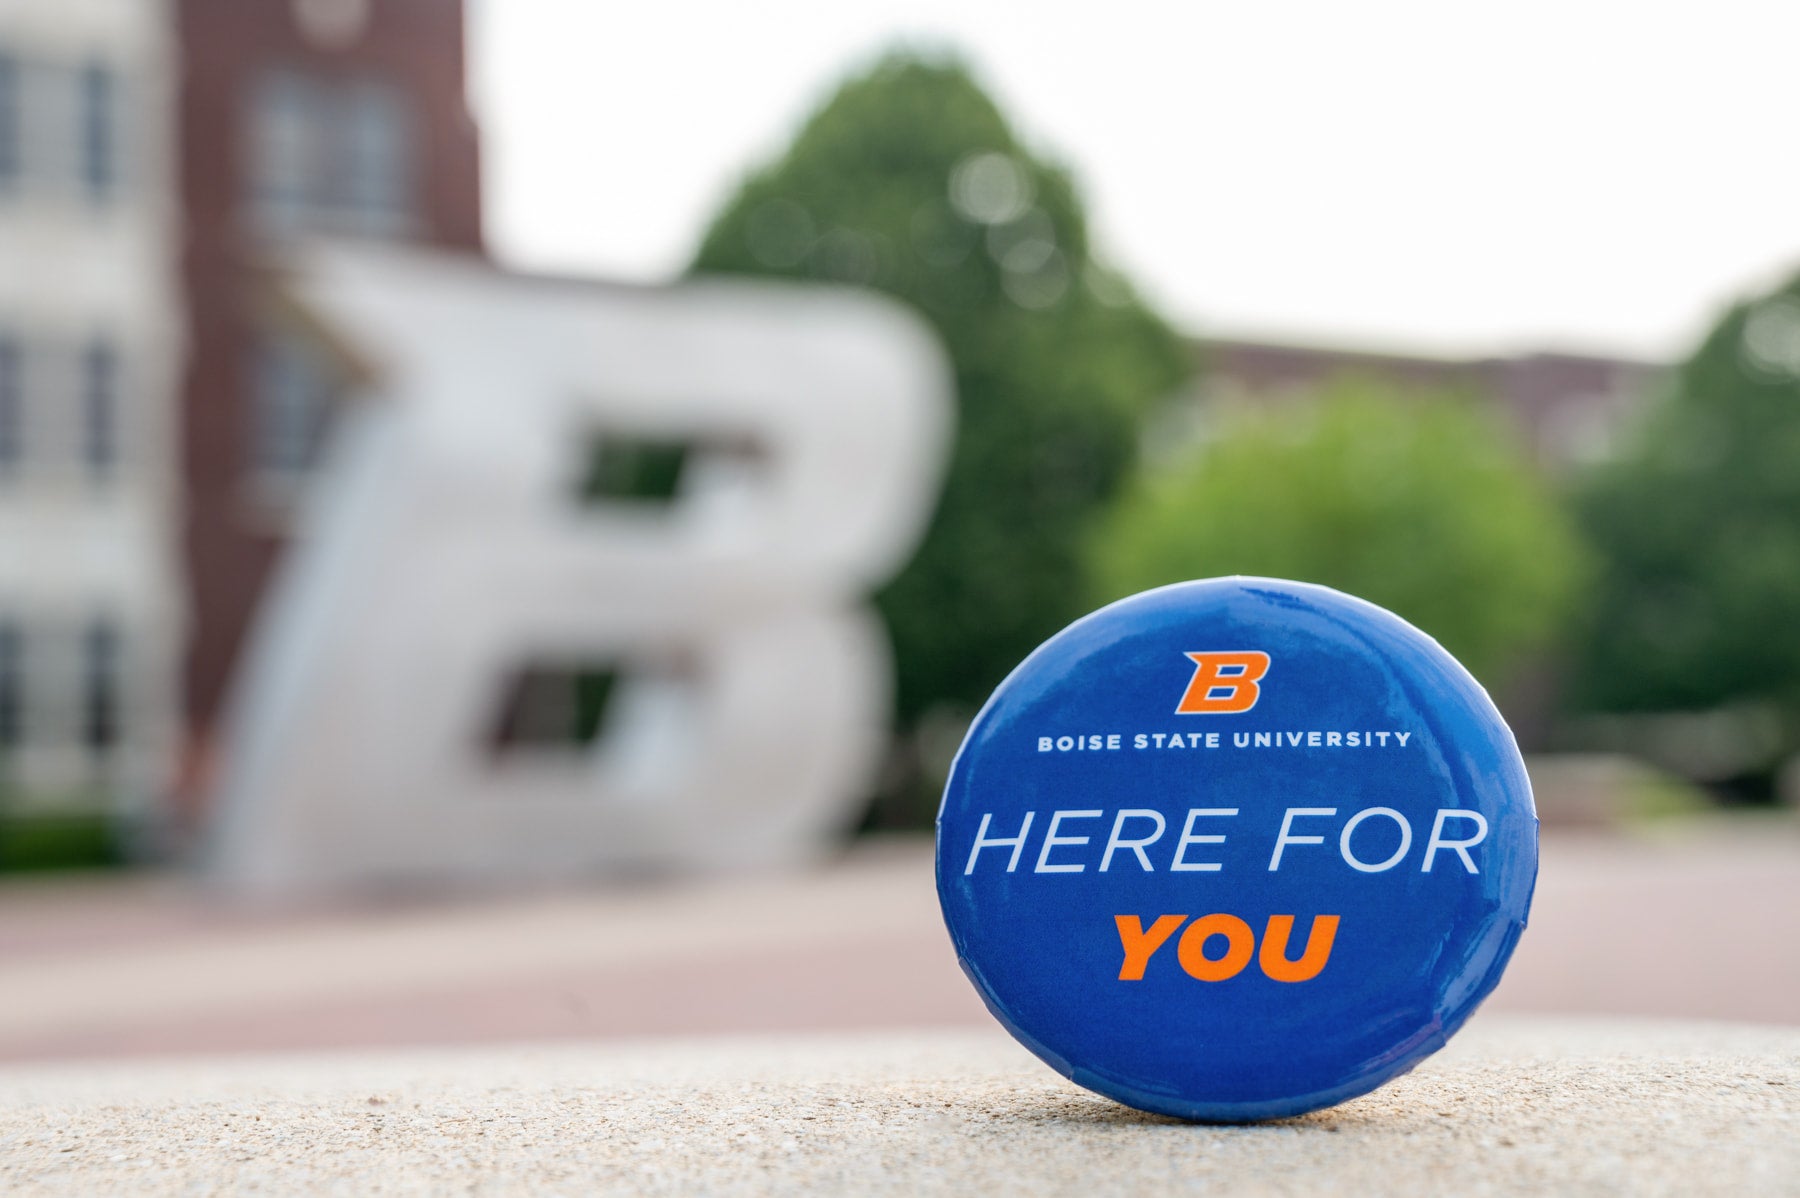 Boise State "Here For You" image